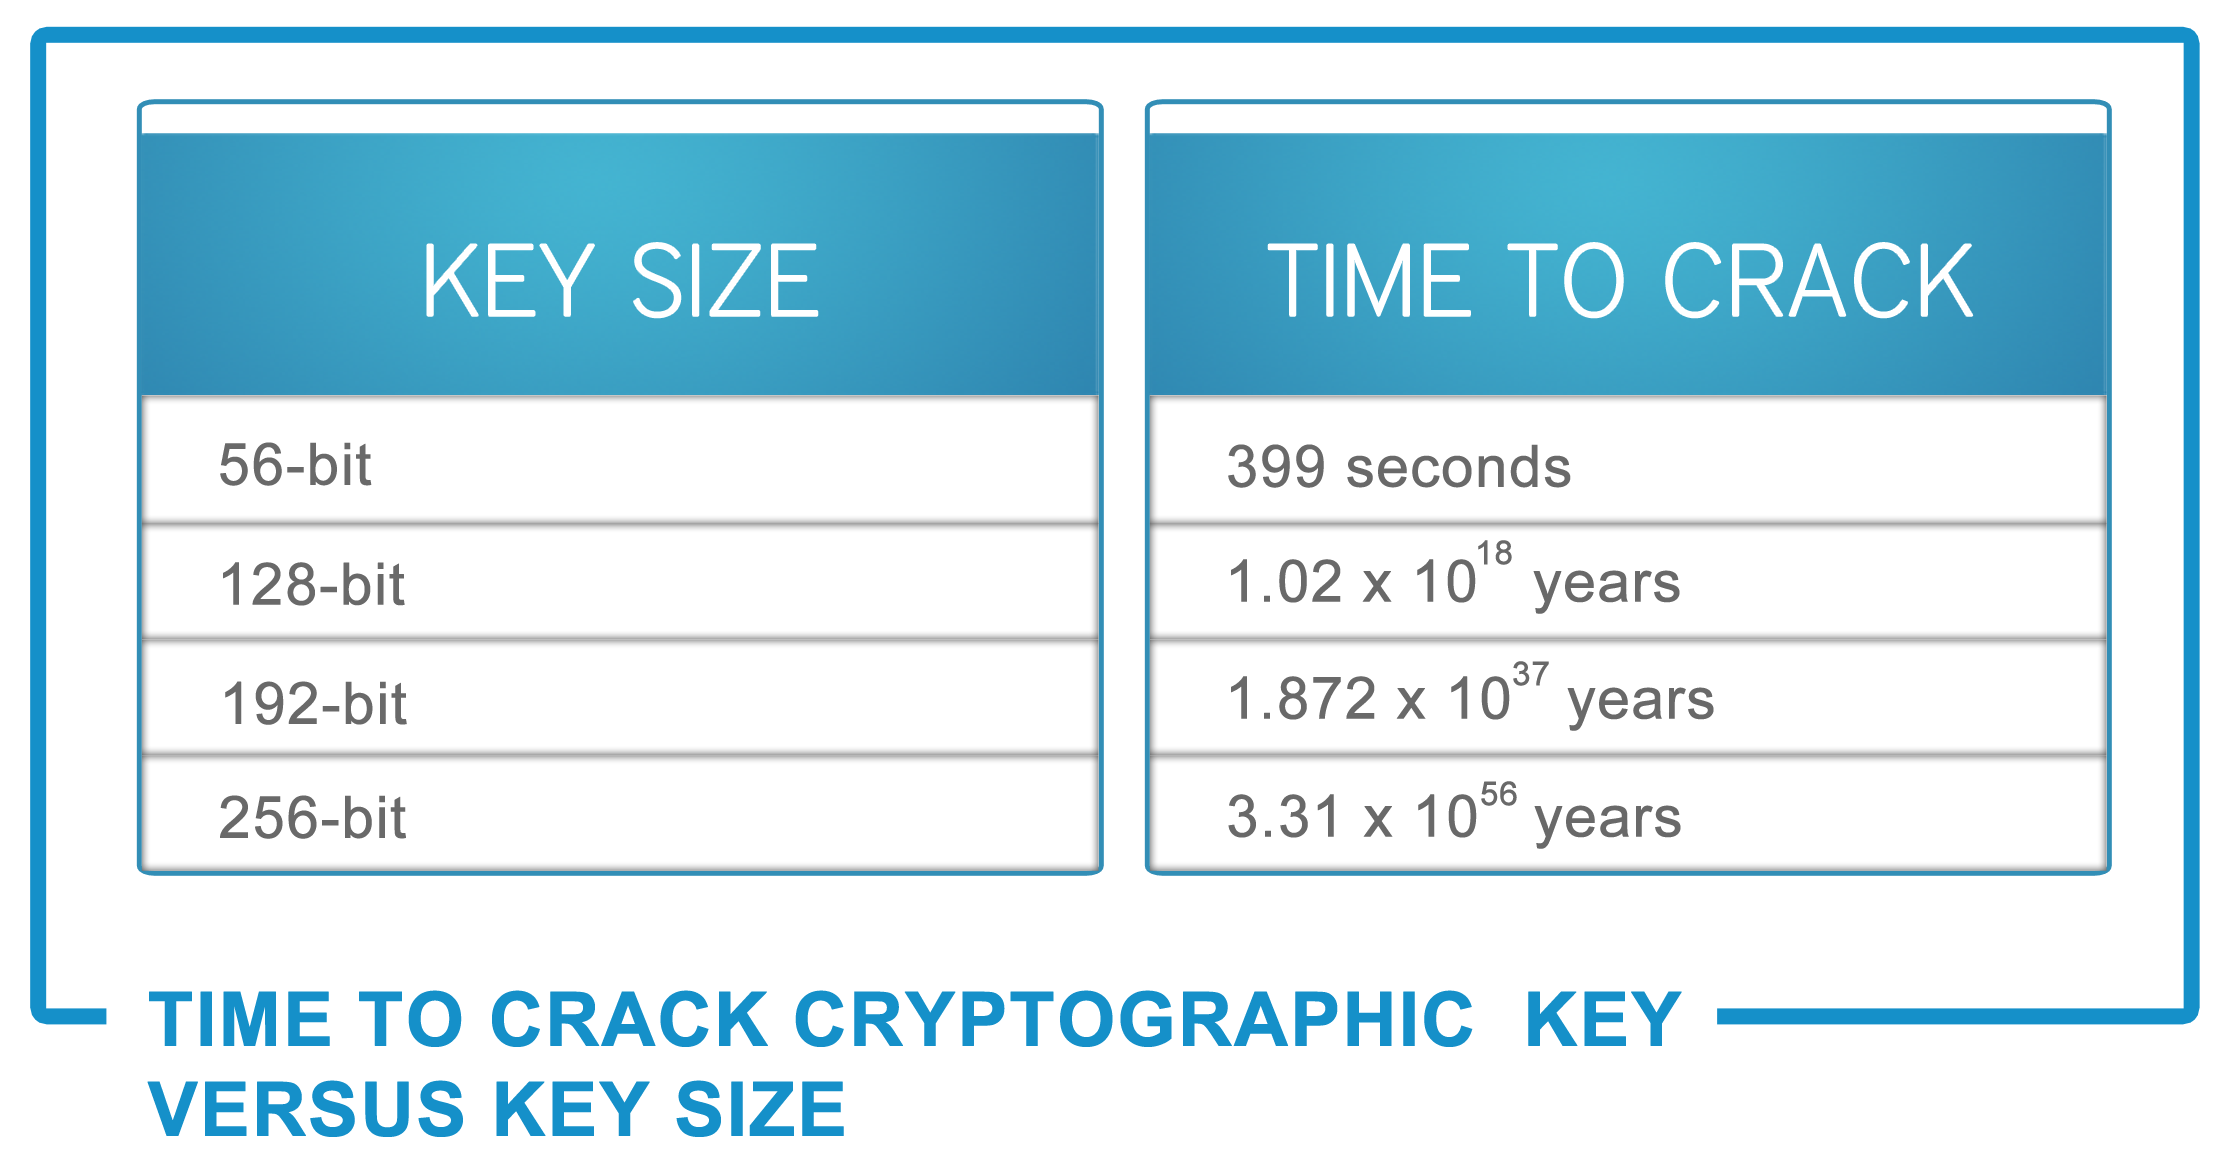 time-to-crack-cryptographic-key-versus-key-size